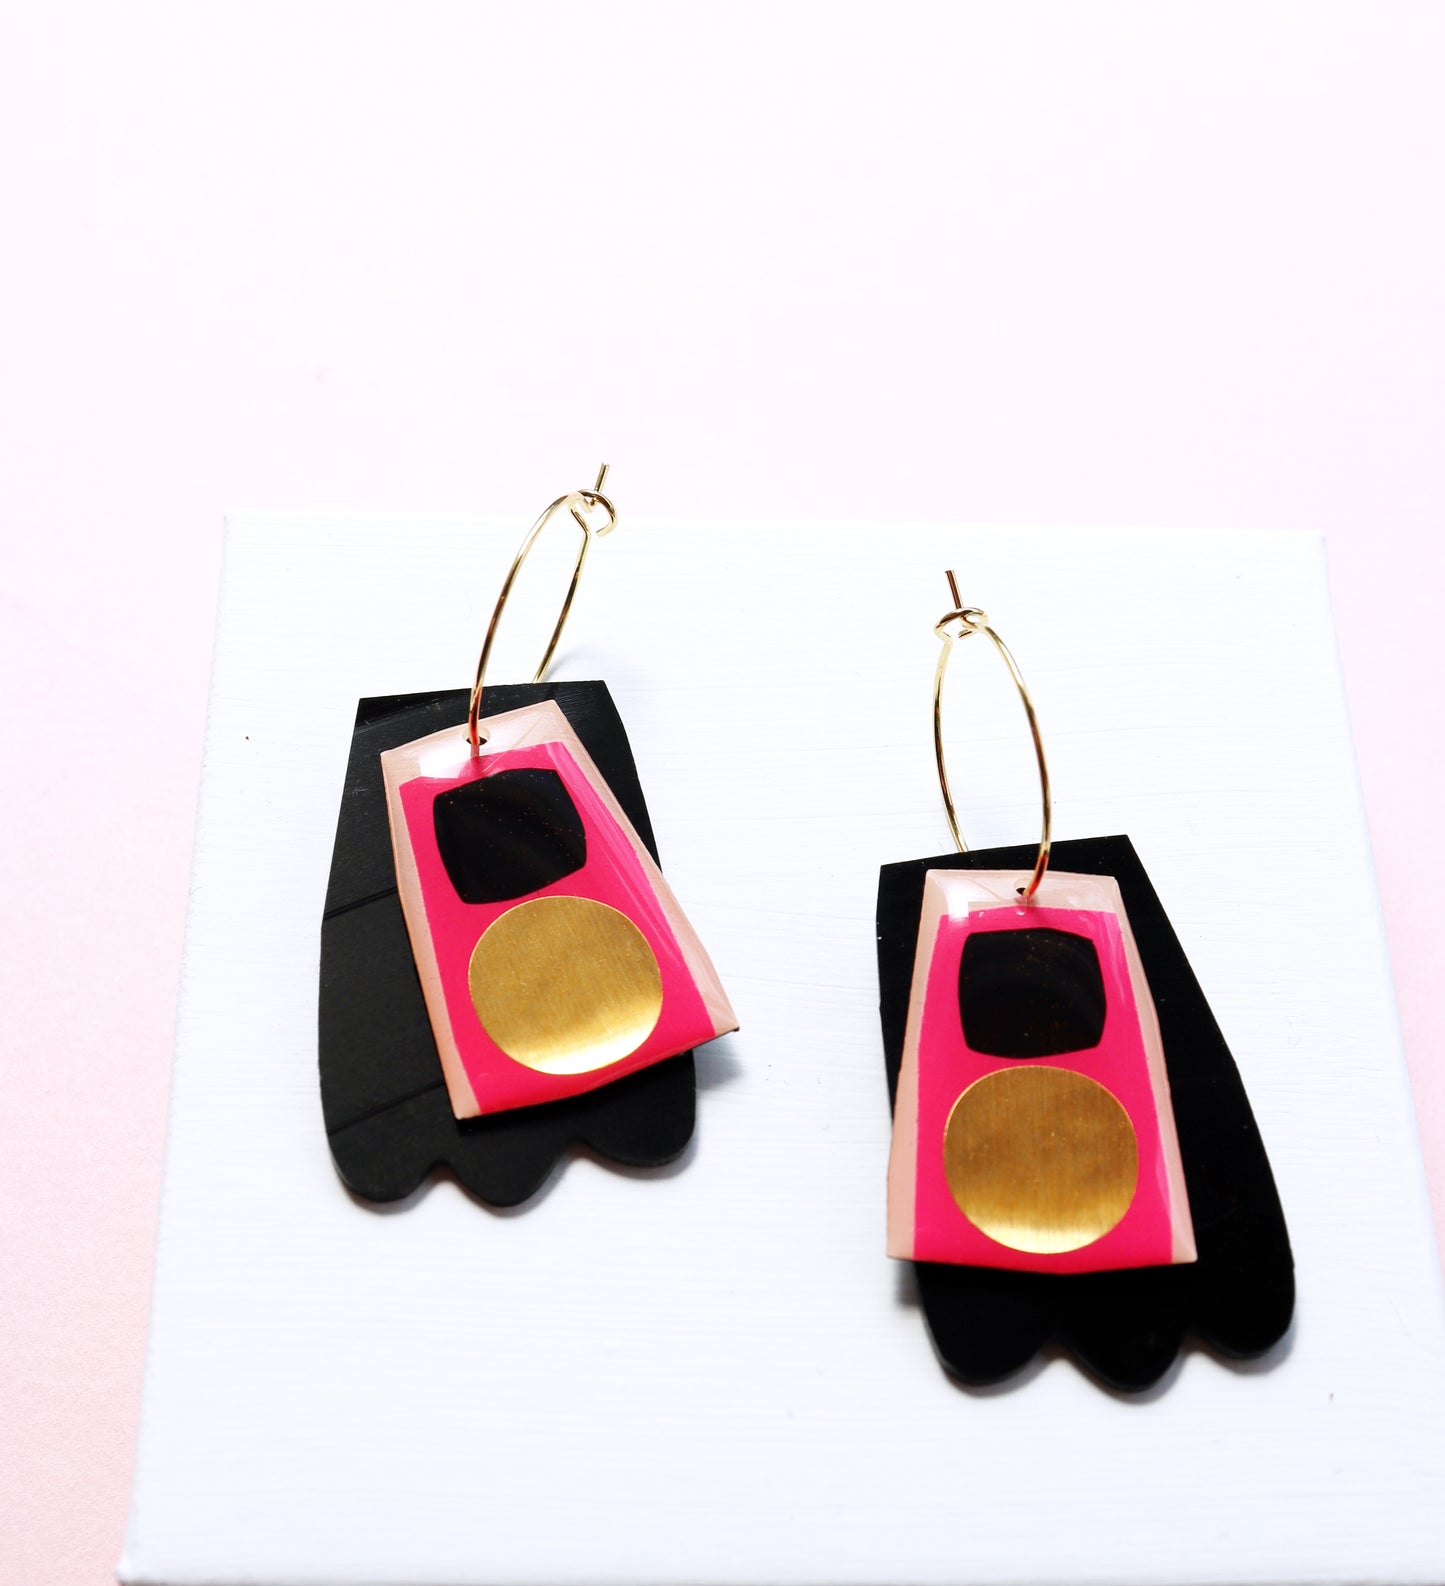 FROUFROU no. 2 in hot pink and gold / recycled vinyl jewellery